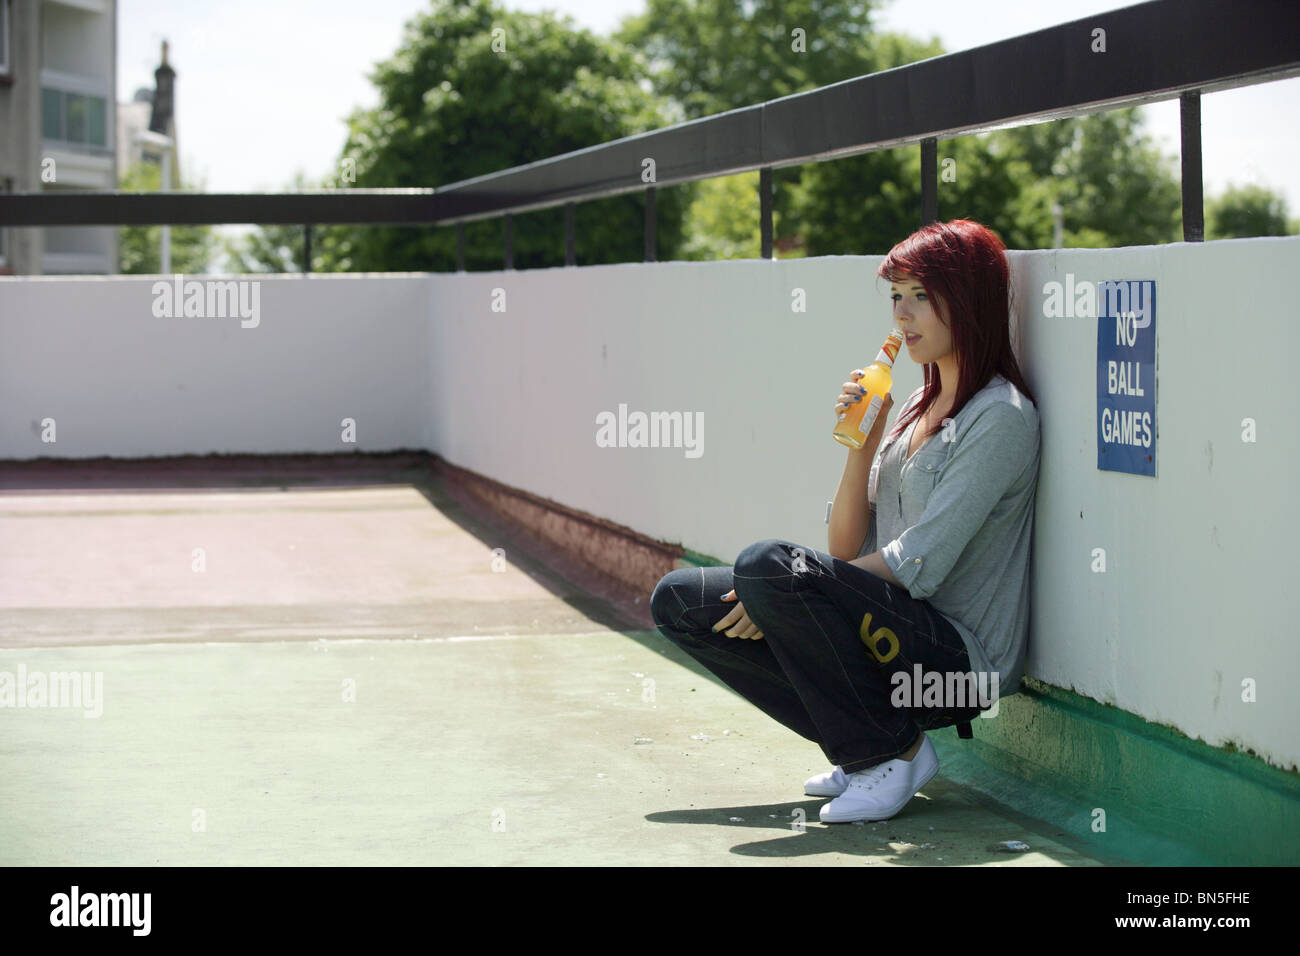 Teenage girl drinking alone in a town car park. Stock Photo